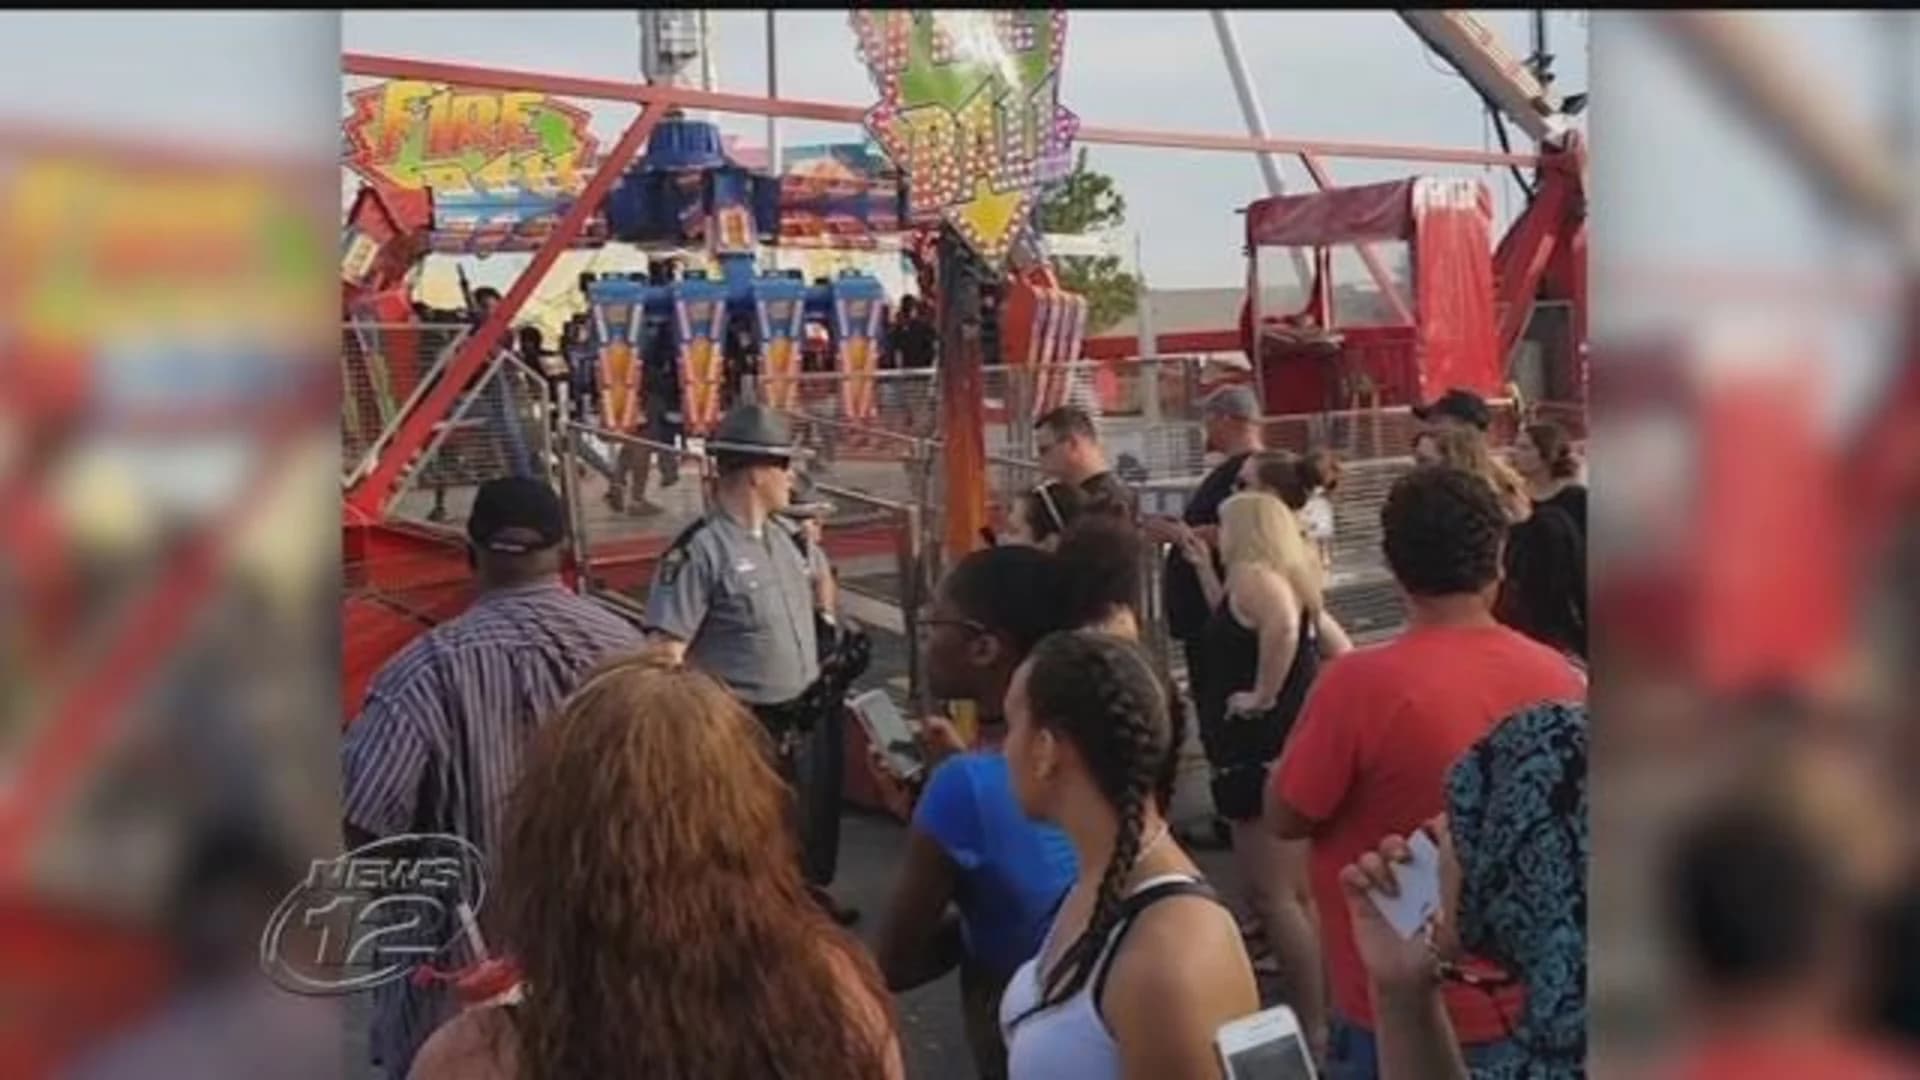 Manufacturer says corrosion caused Fire Ball ride to break apart at fair